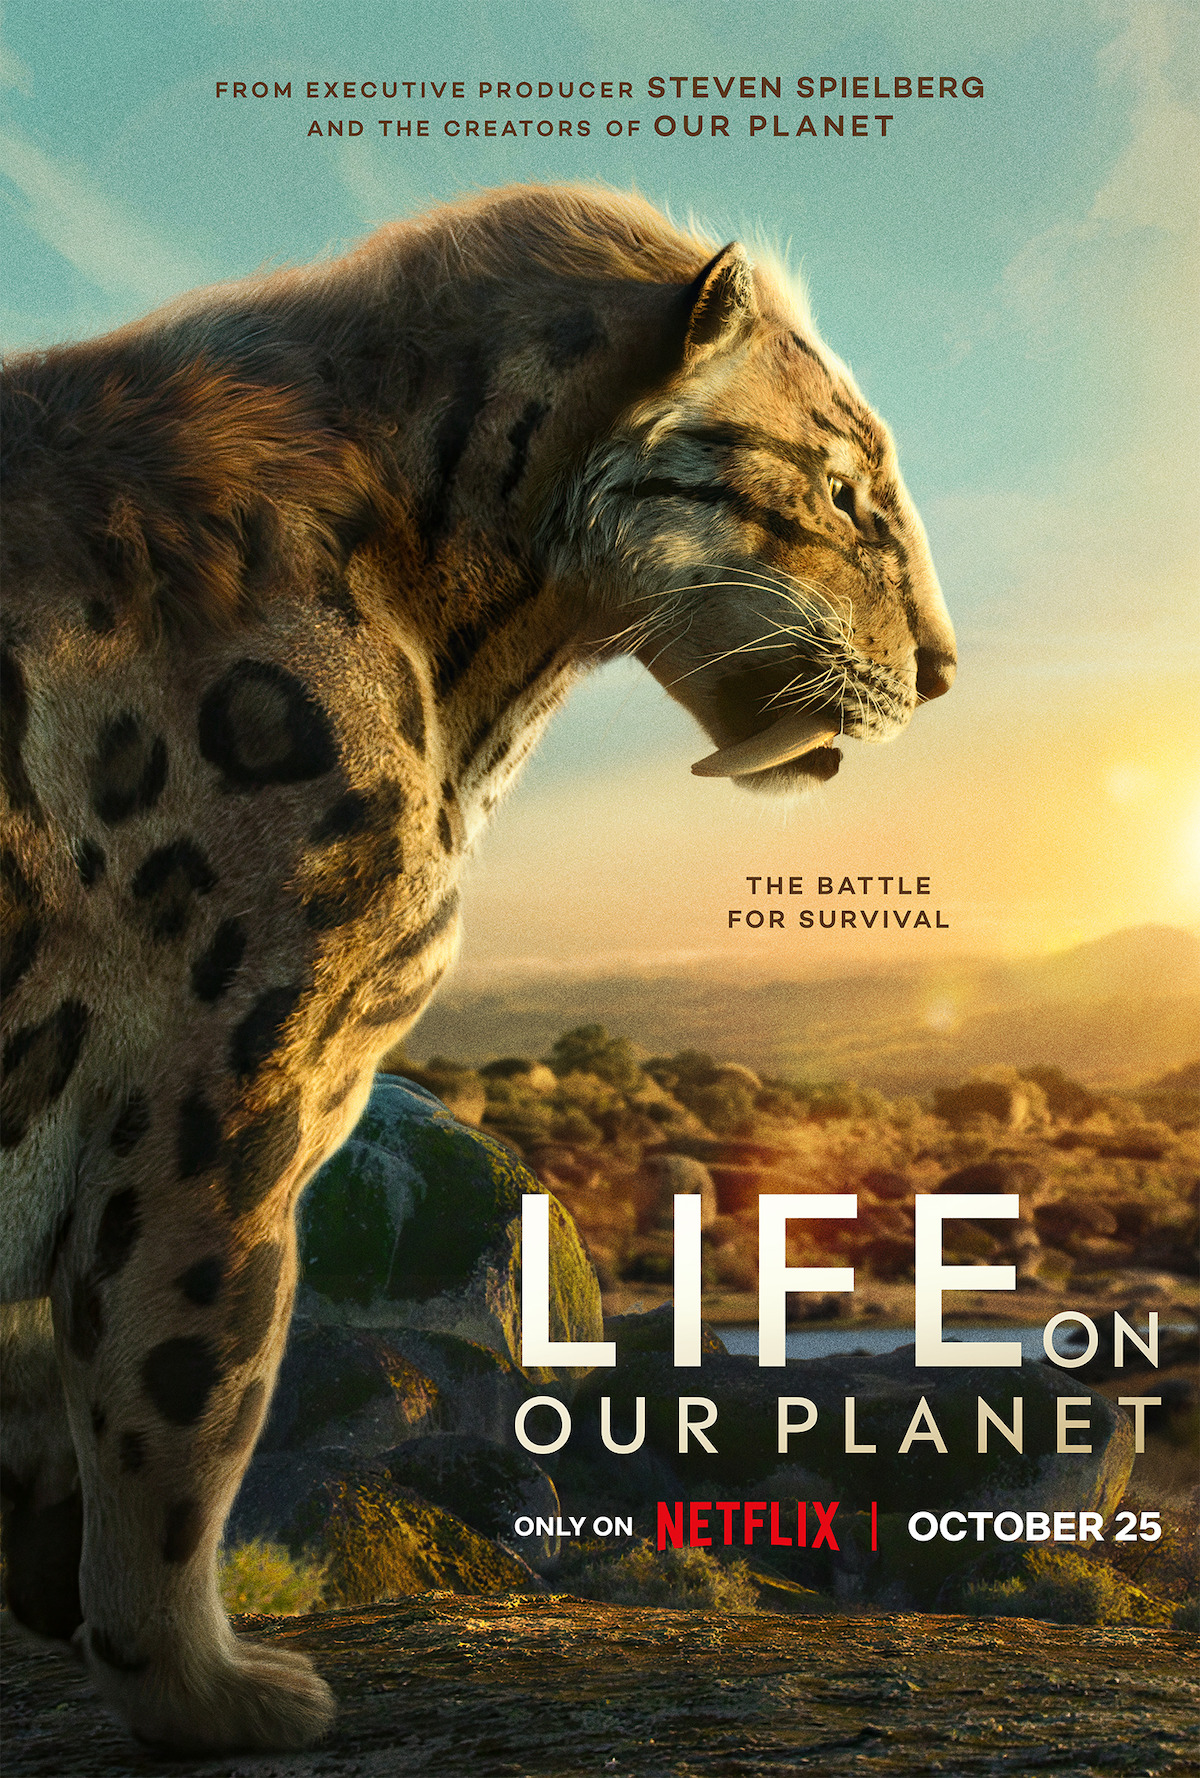 Life On Our Planet Isnt Just a Dinosaur Documentary, Its the Four-Billion Year Story of Life As We Know It